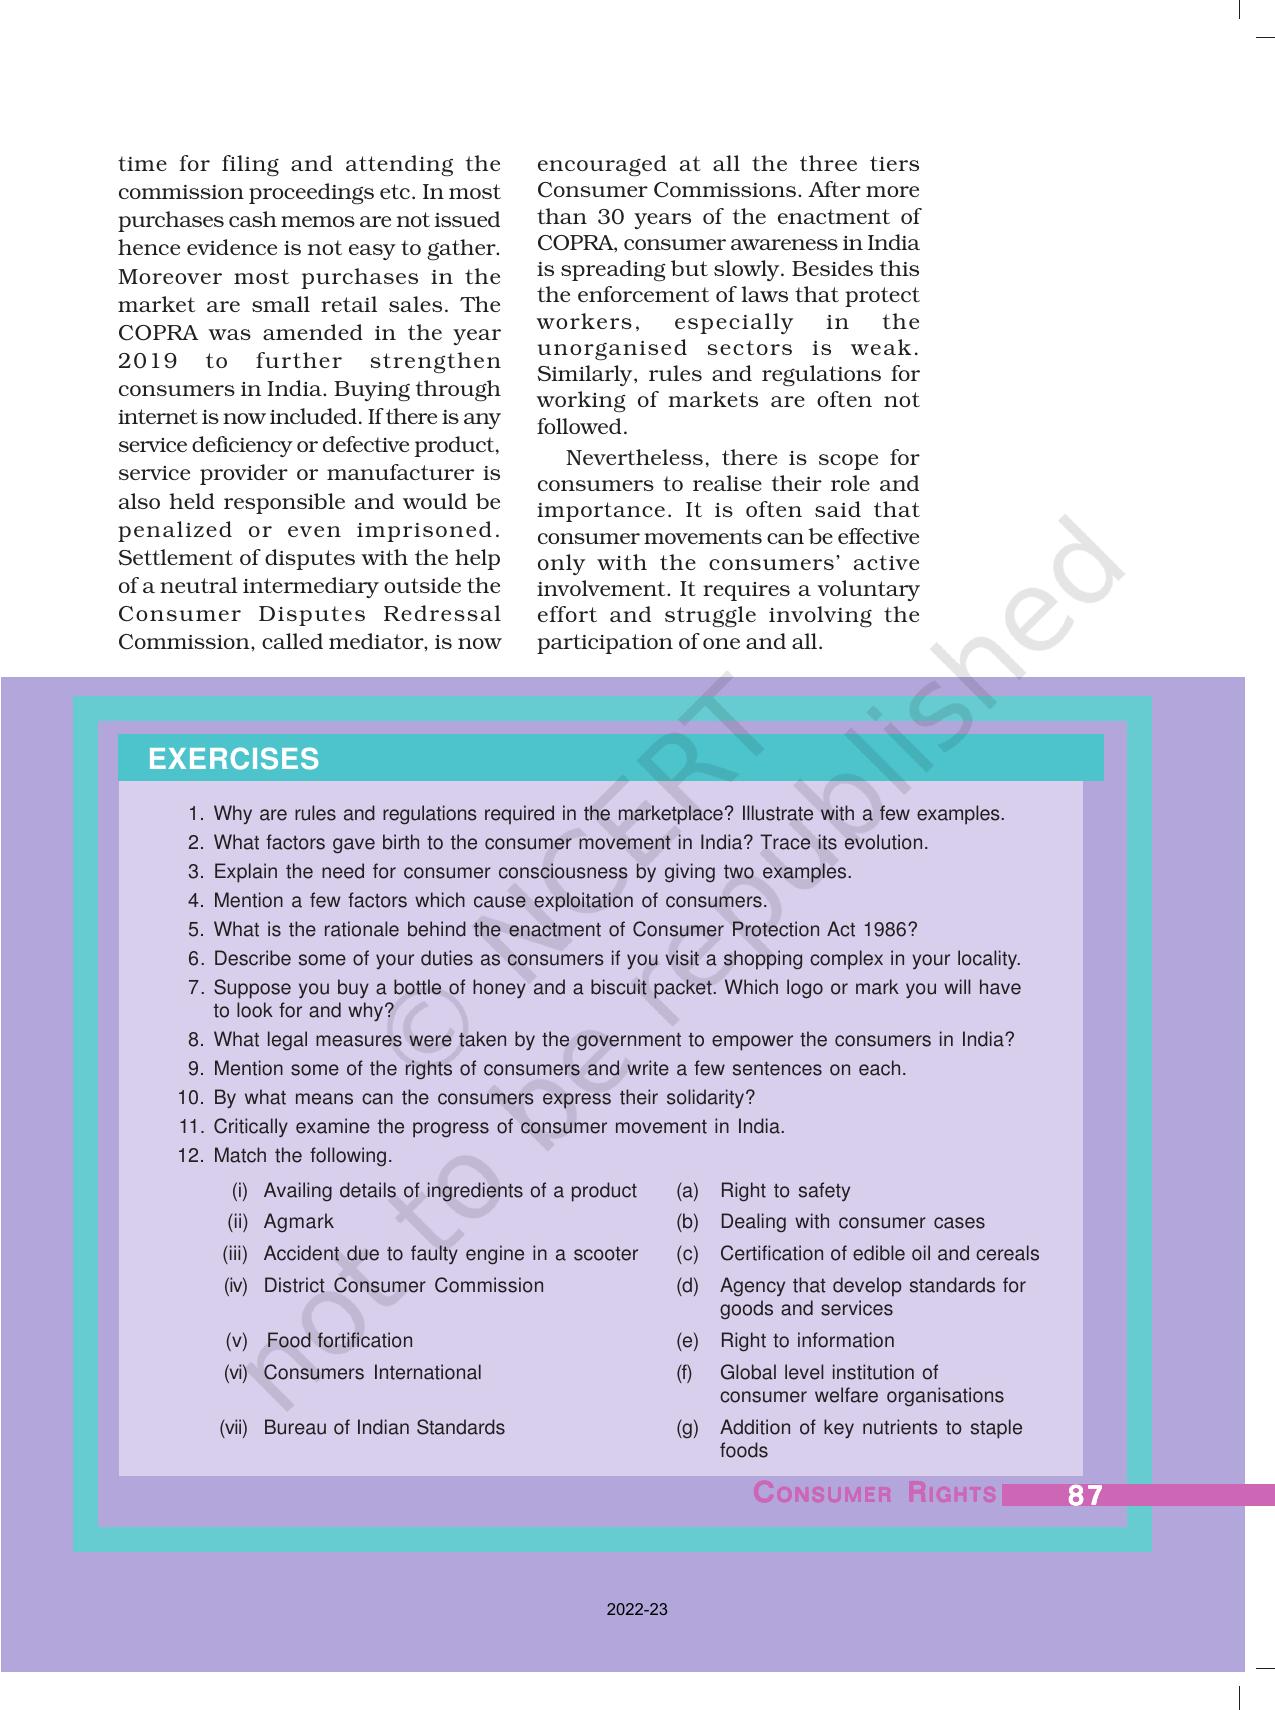 NCERT Book for Class 10 Economics Chapter 5 Consumer Rights - Page 14